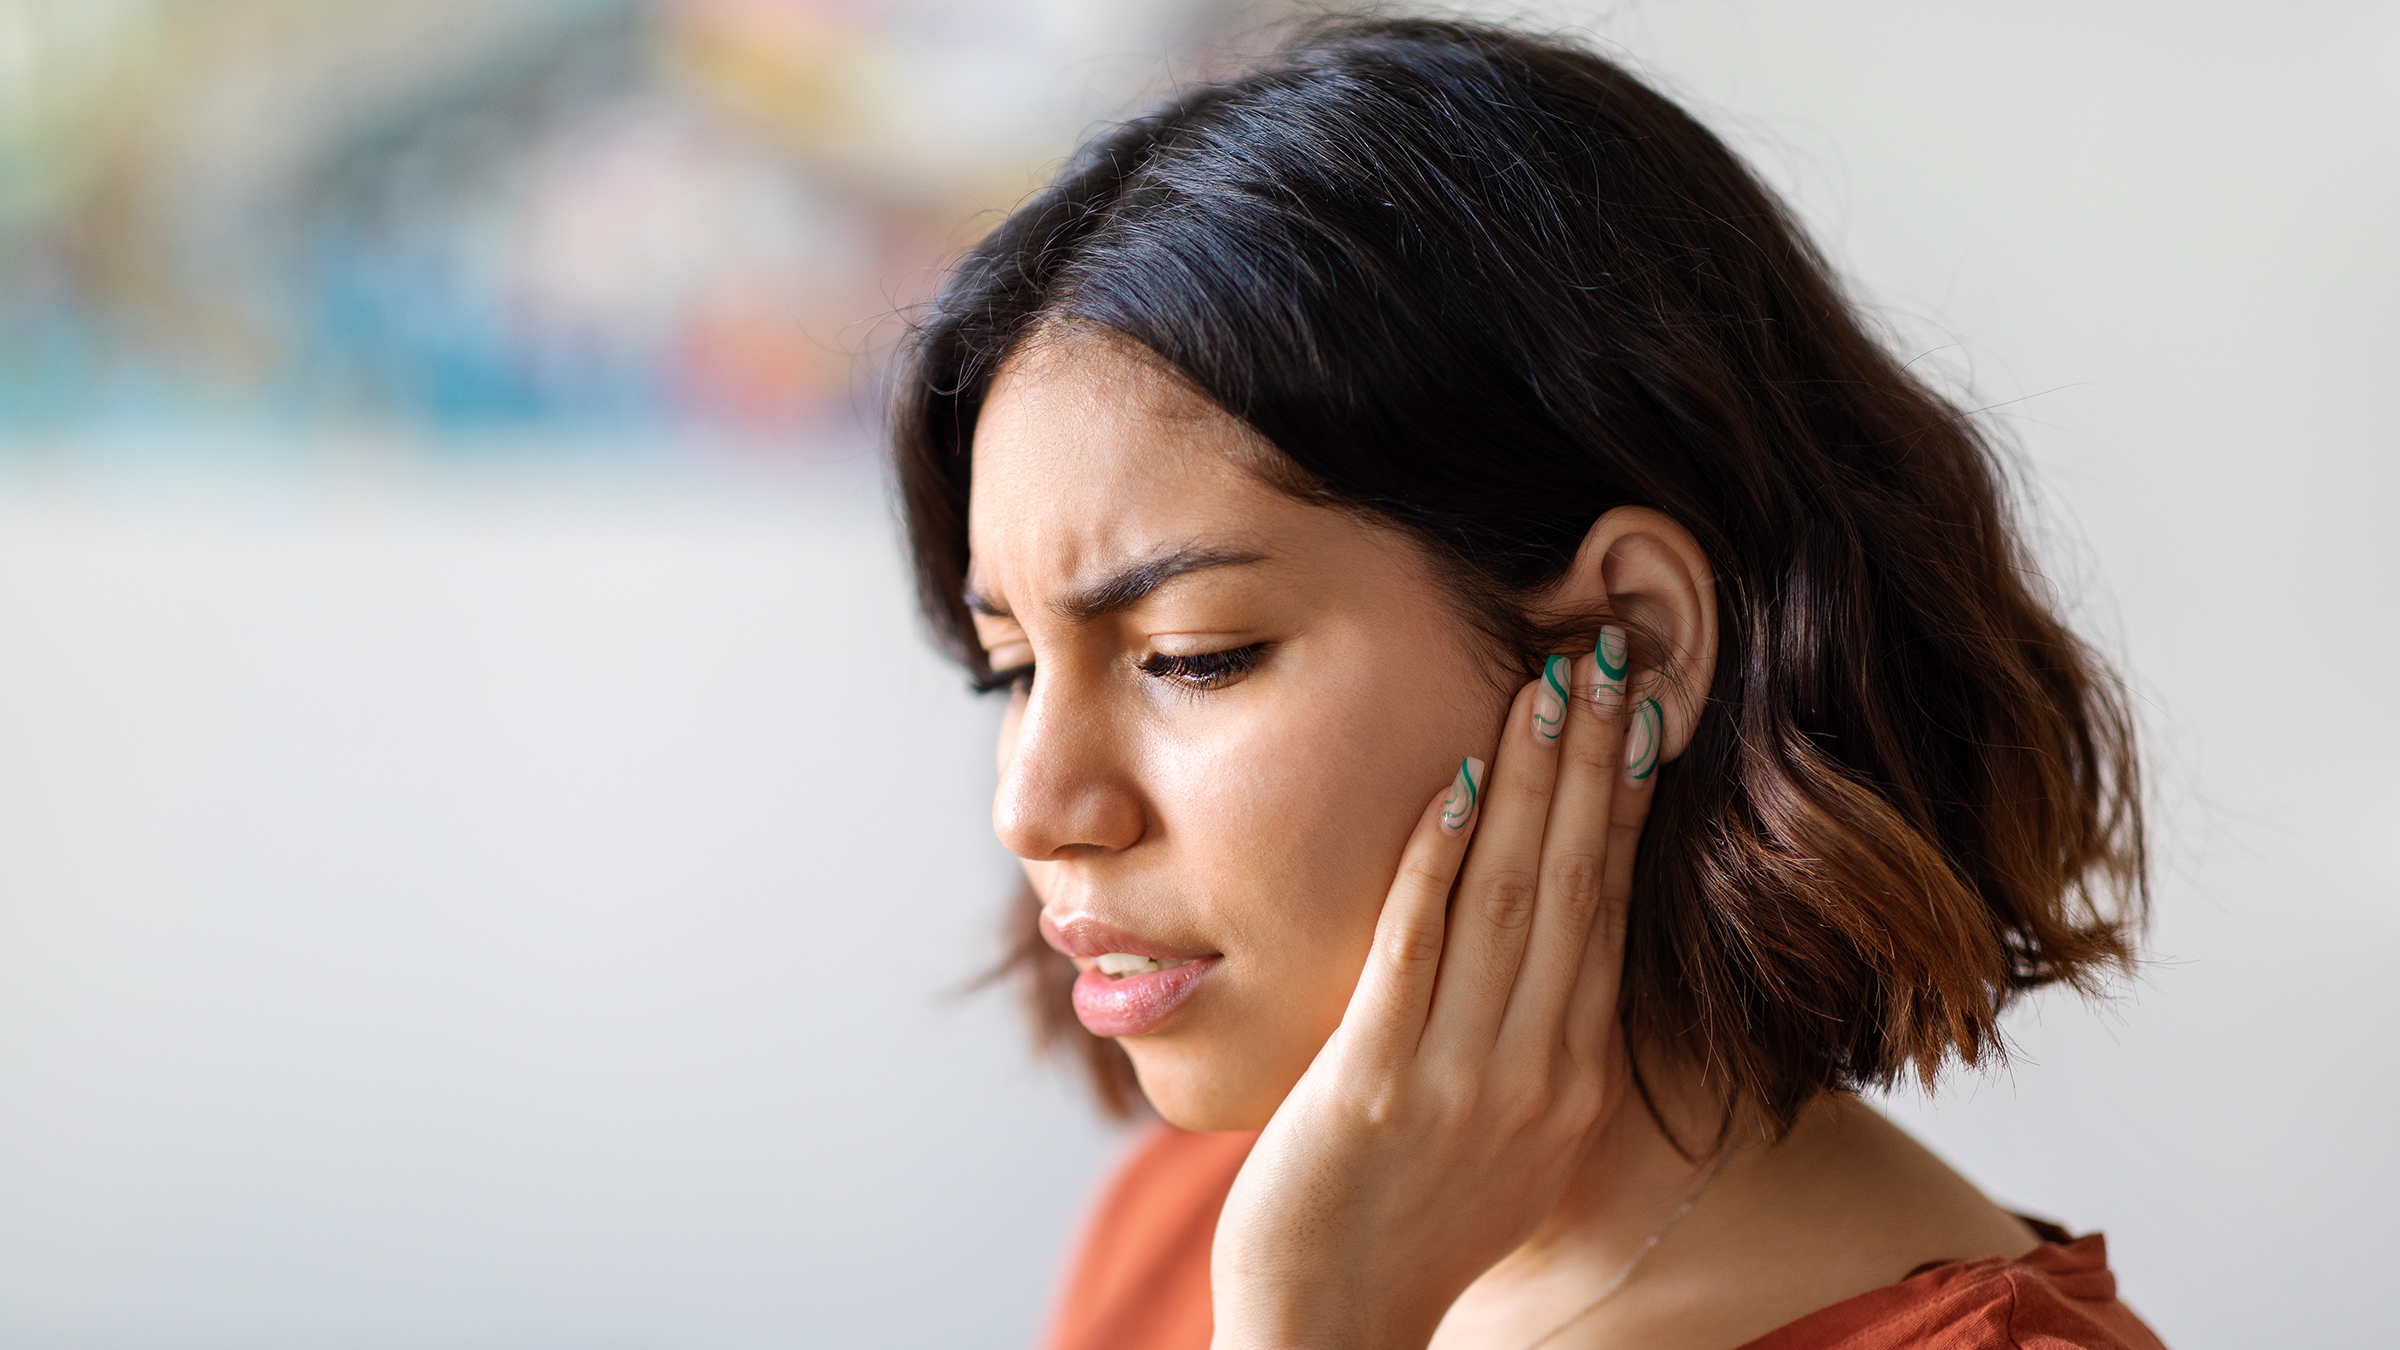 ear infection: young woman with earache 1479050692